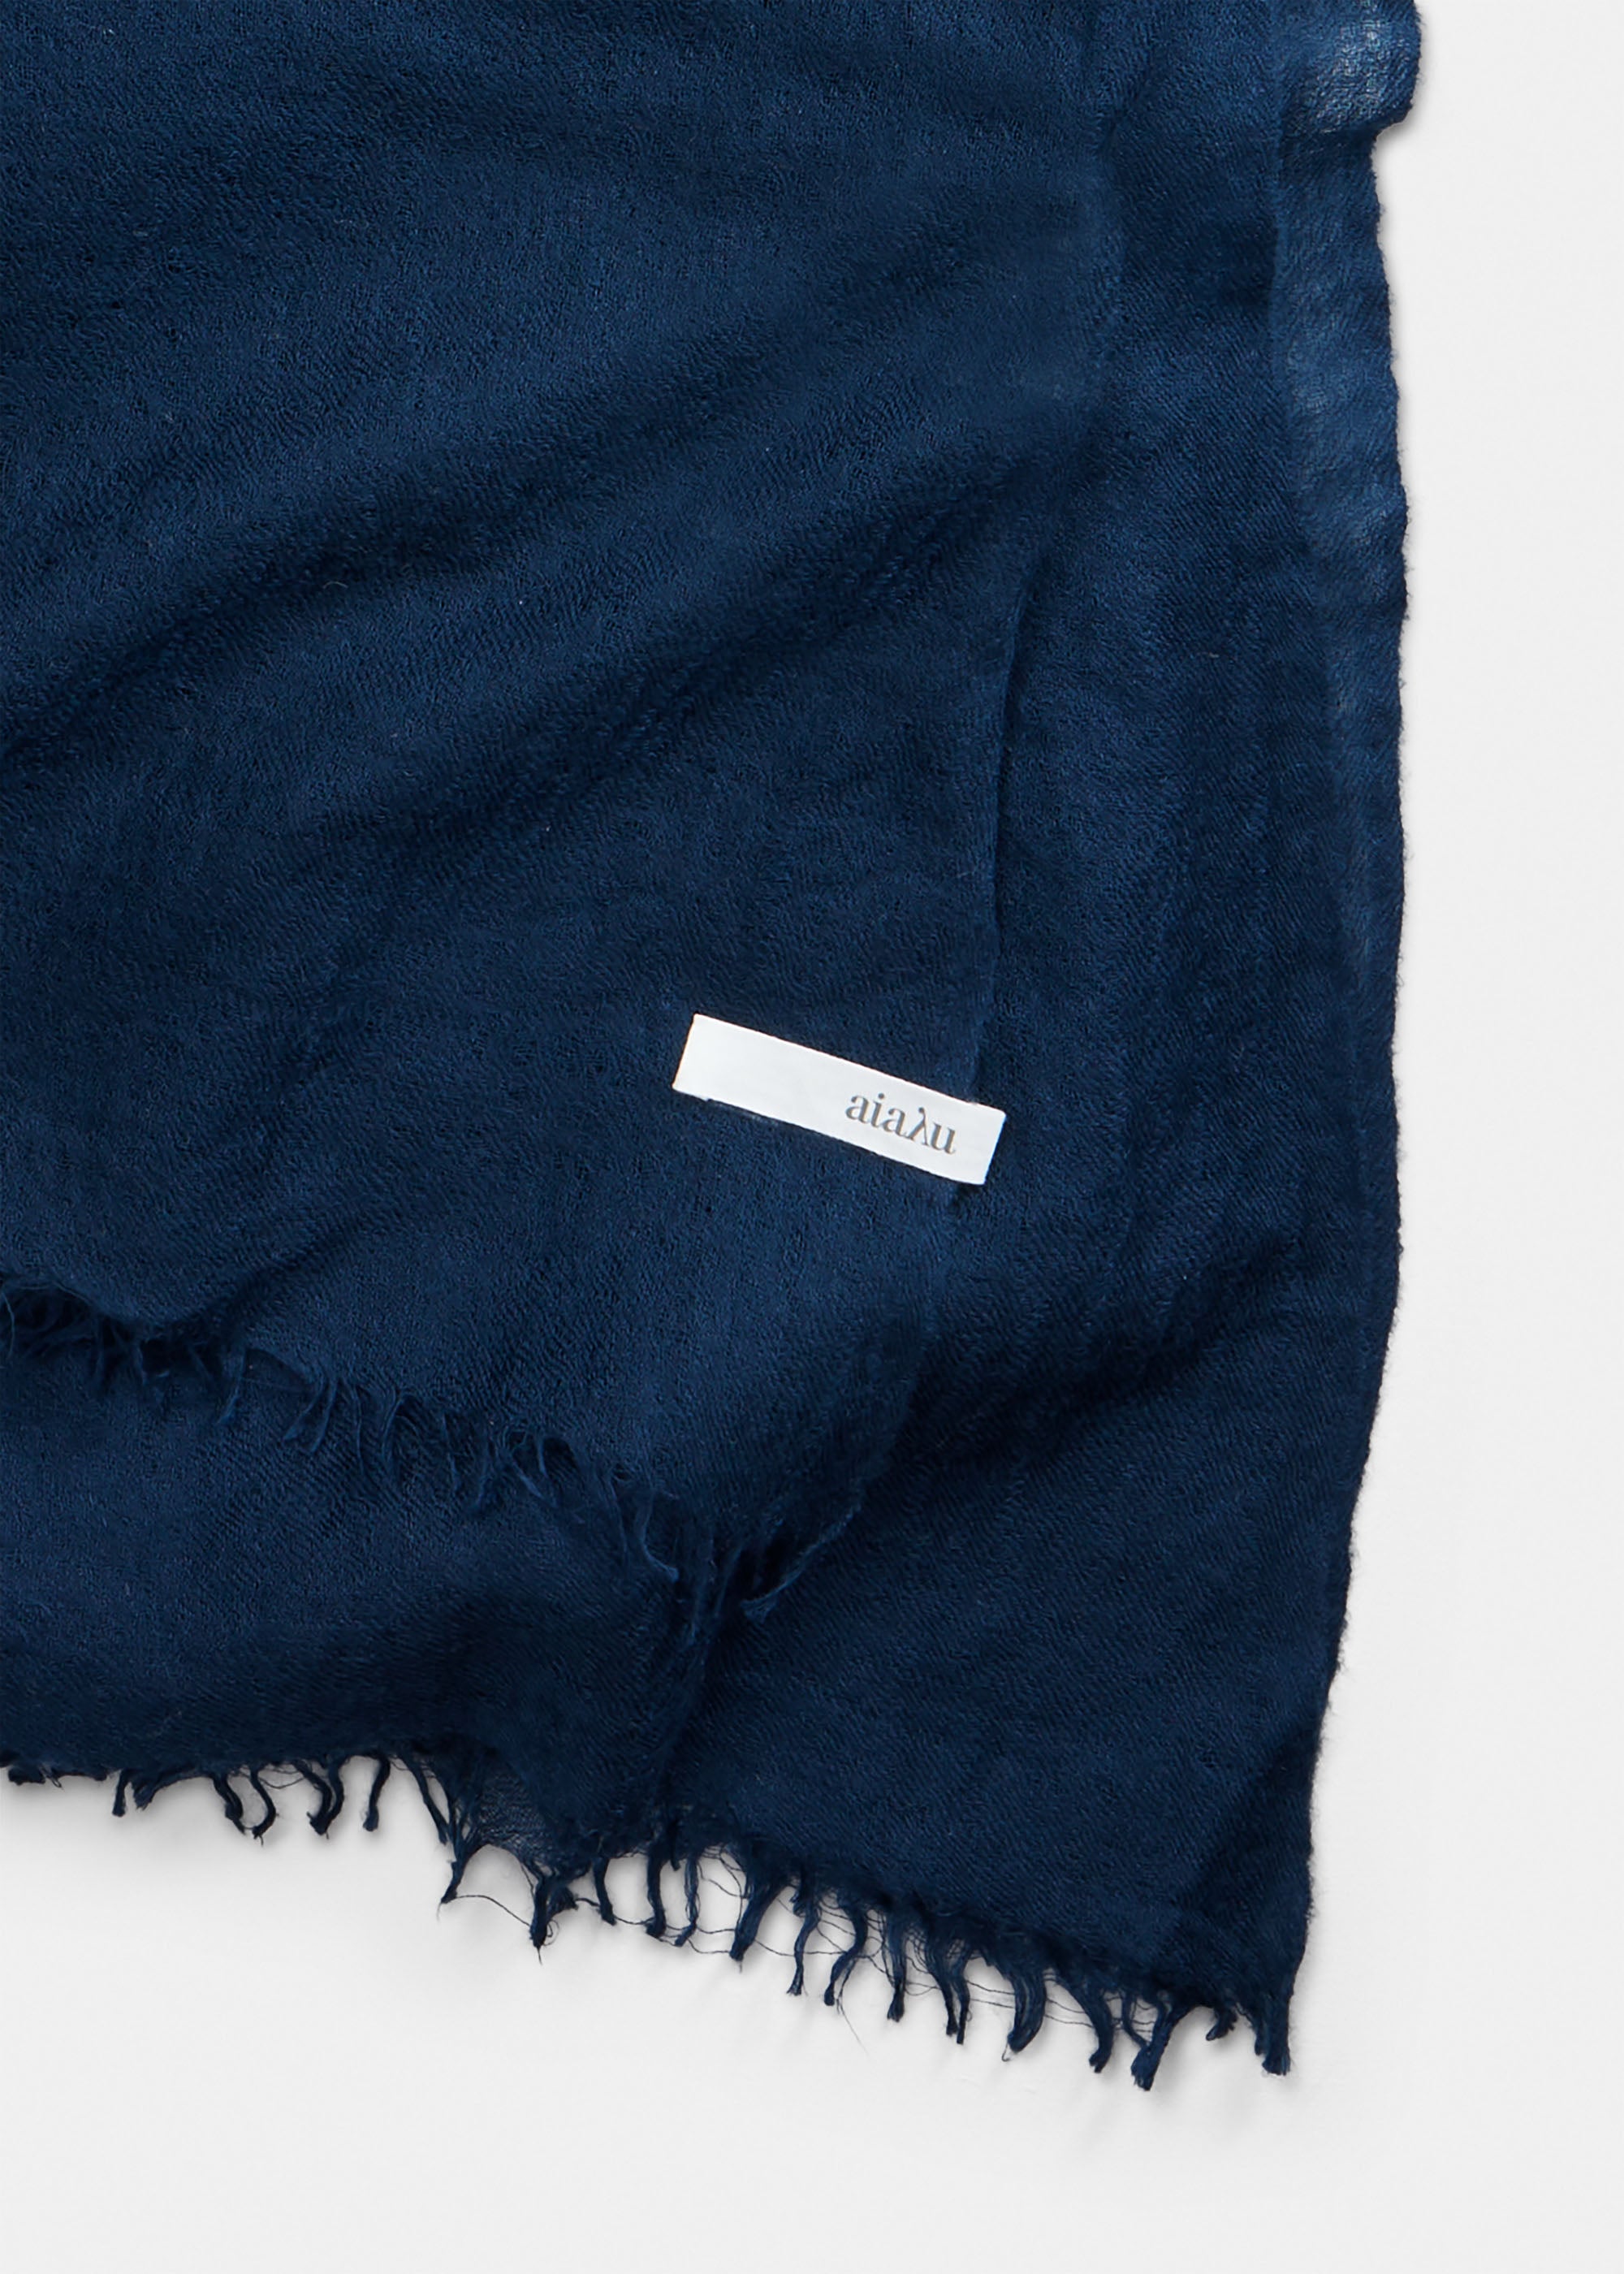 Poon cashmere scarf | Navy